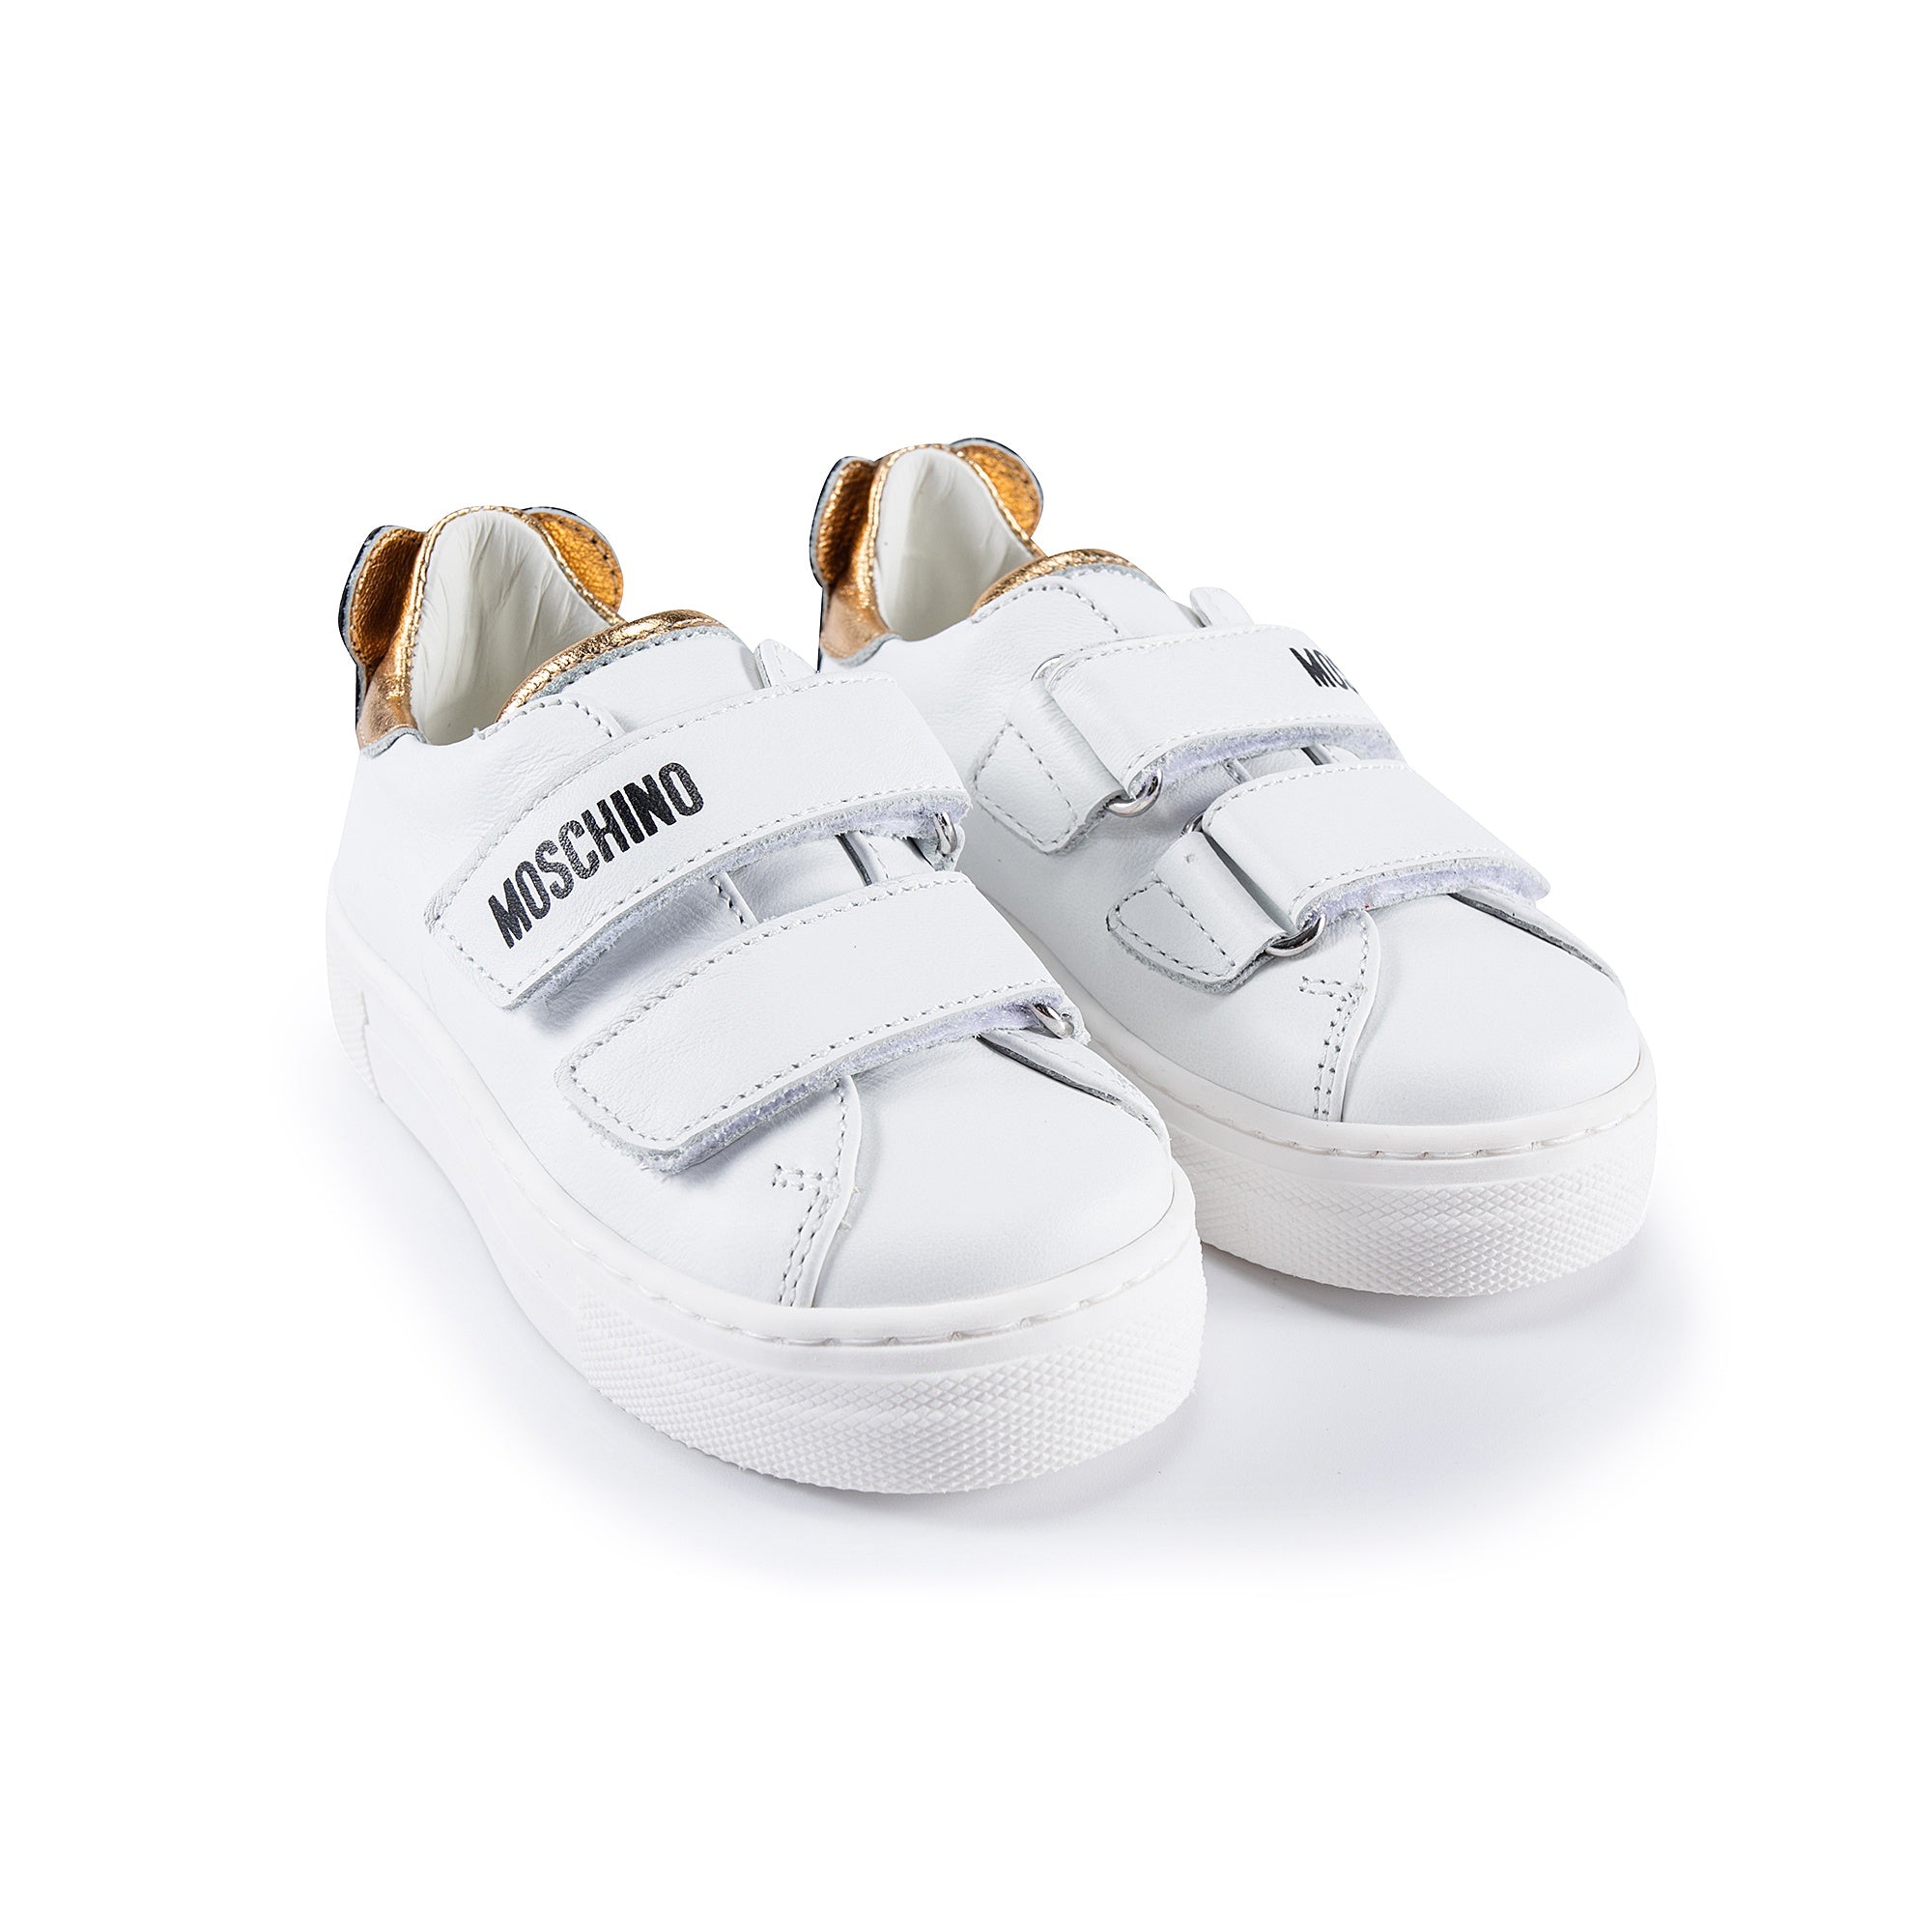 Boys & Girls Gold Patch Teddy Sneakers